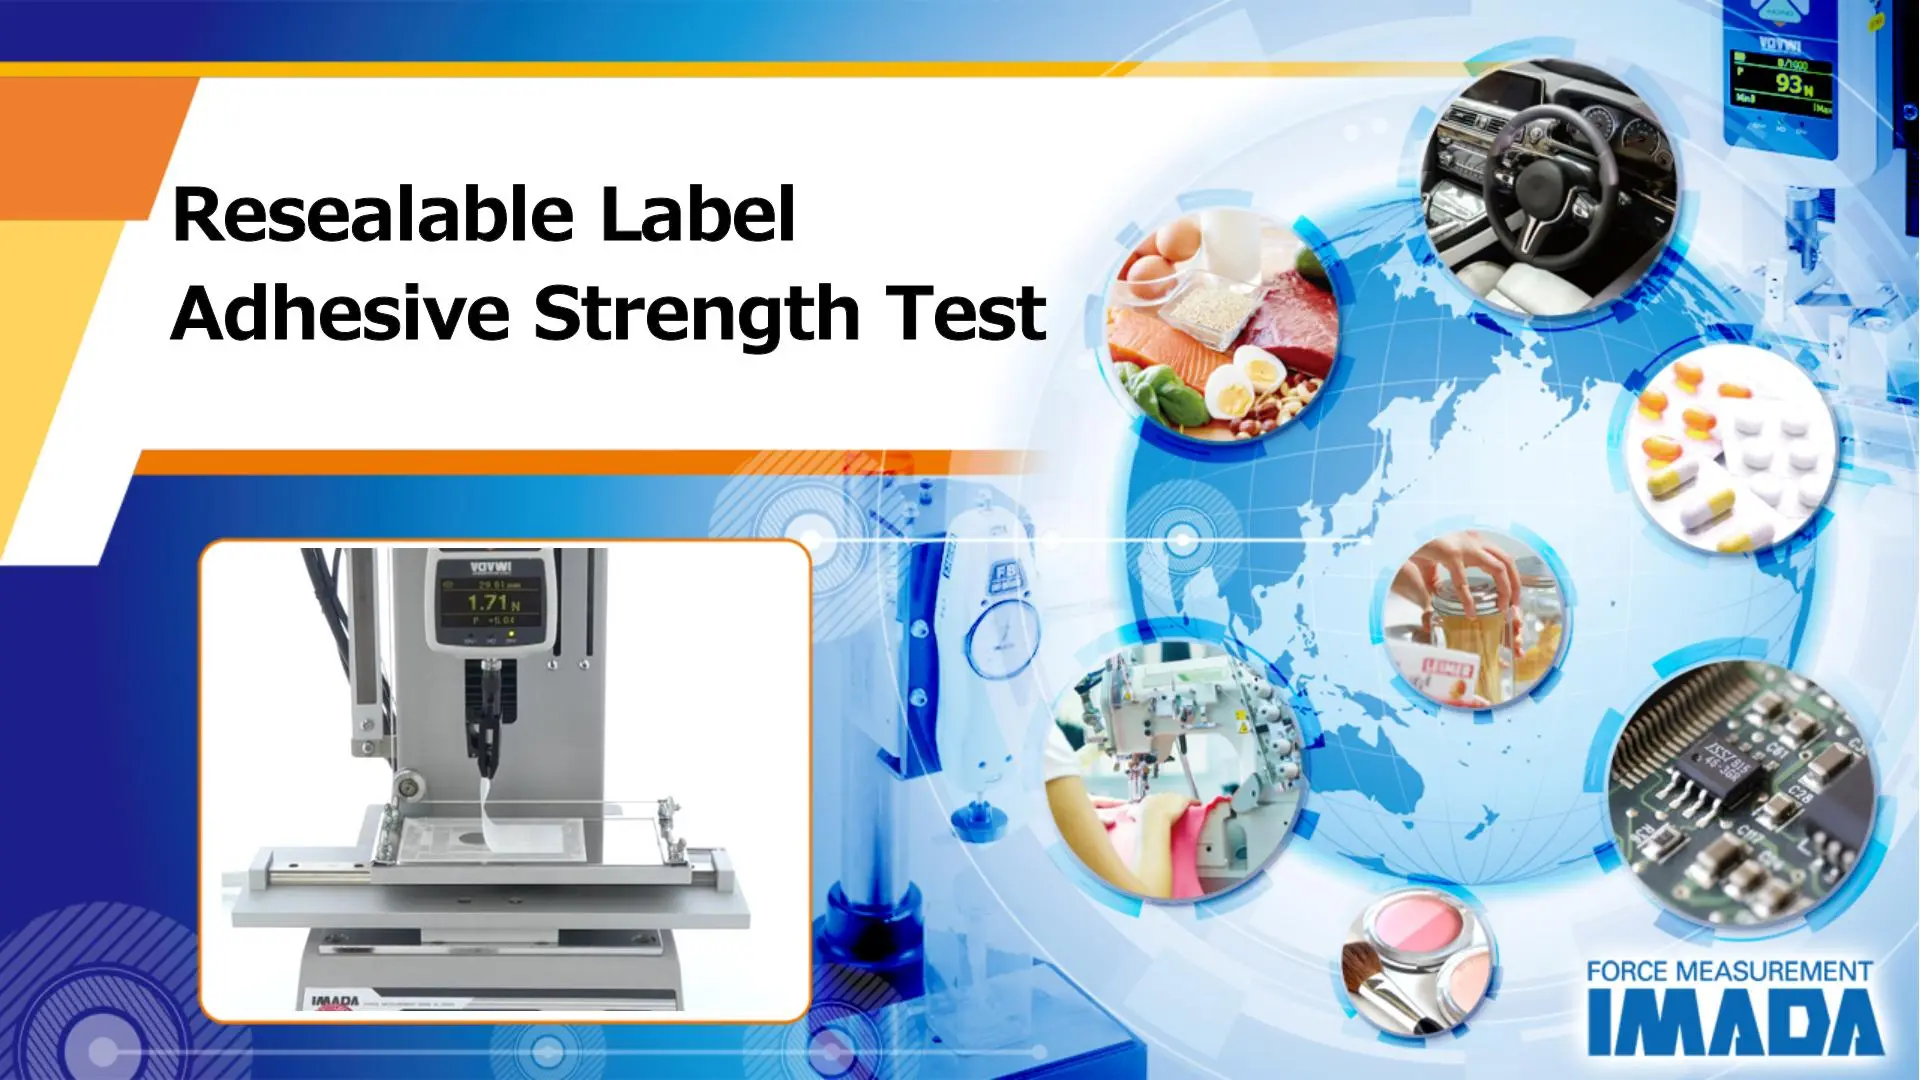 Resealable Label Adhesive Strength Test